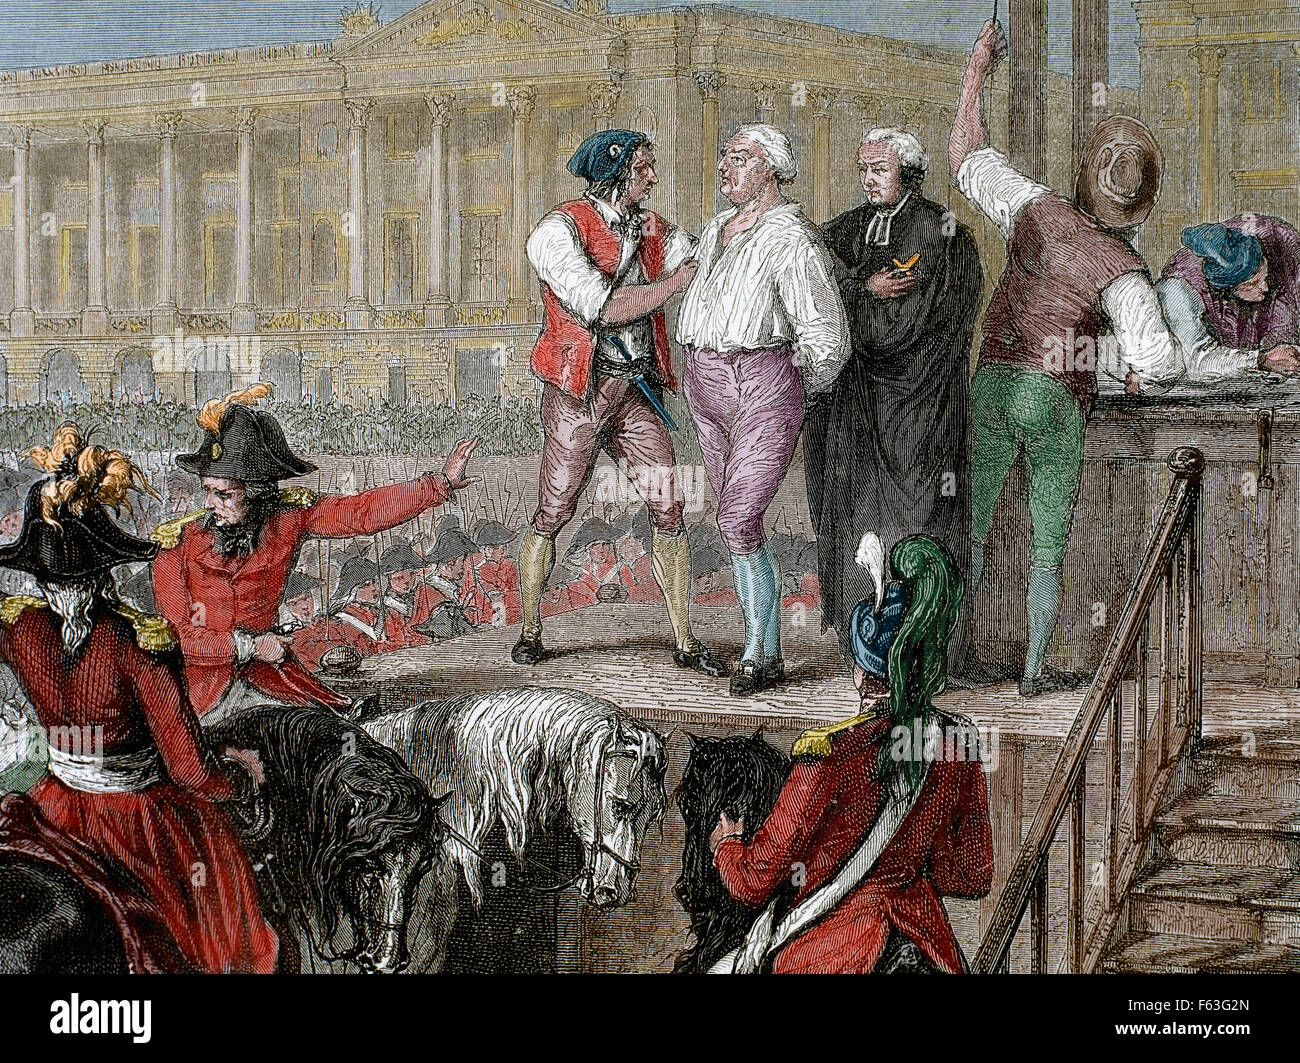 French Revolution. Execution of King Louis XVI (1754-1793) on January 21, 1793. Paris. Colored engraving. Stock Photo